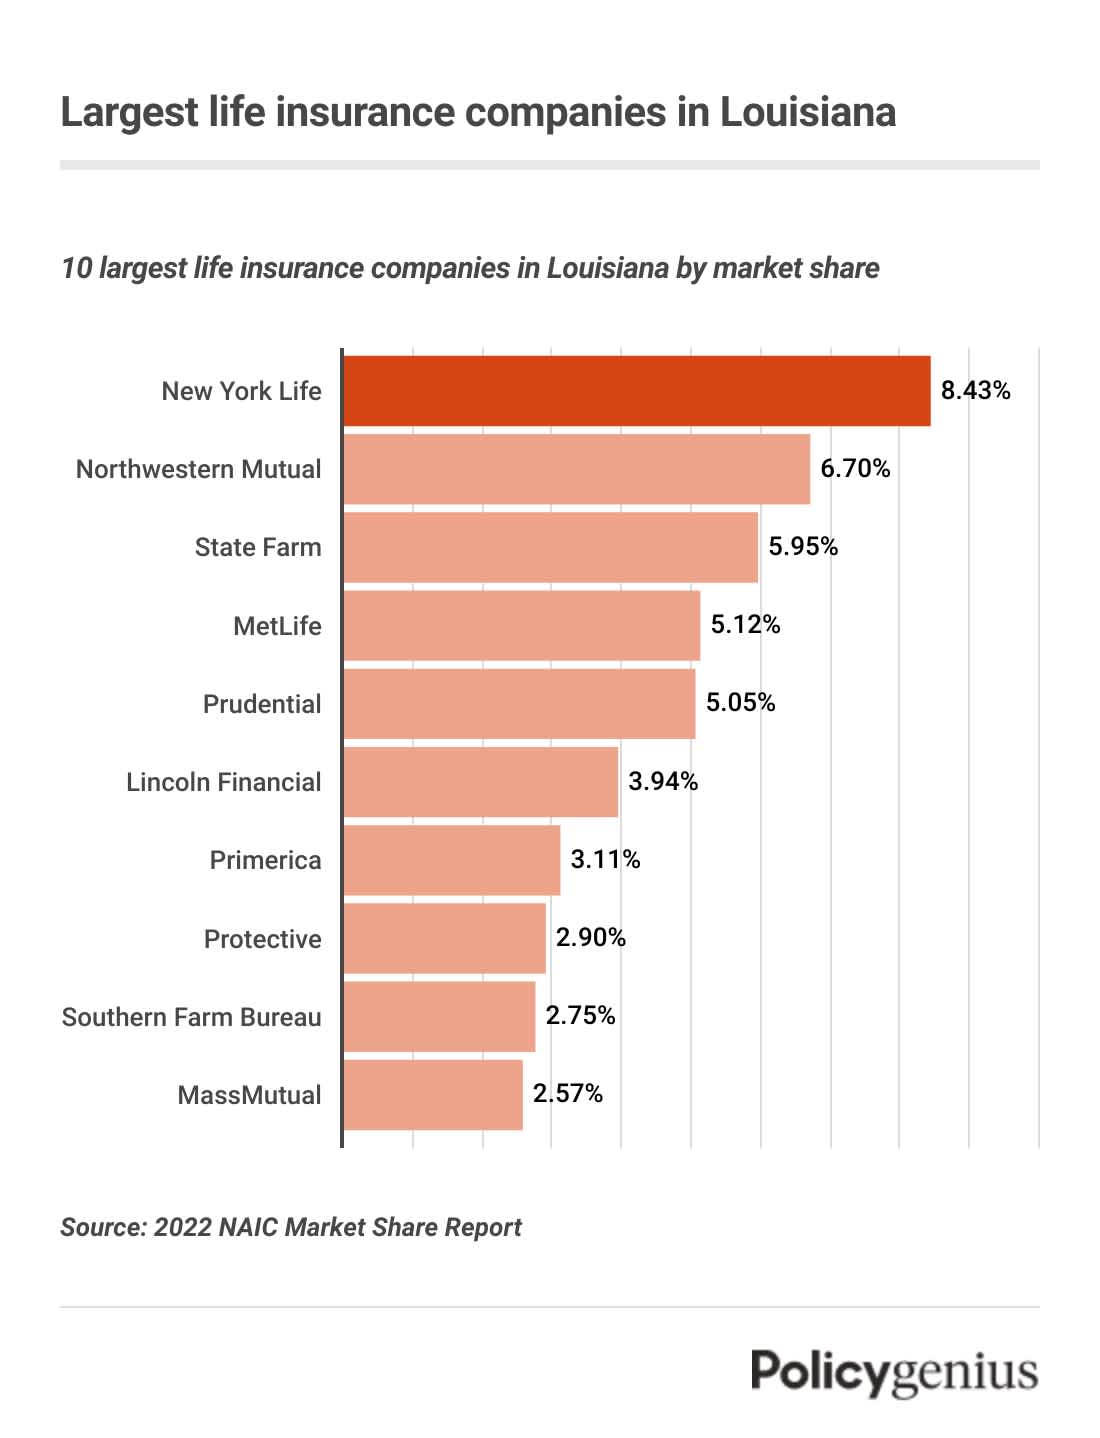 A bar graph showing the largest life insurance companies in Louisiana. New York Life has the largest market share.